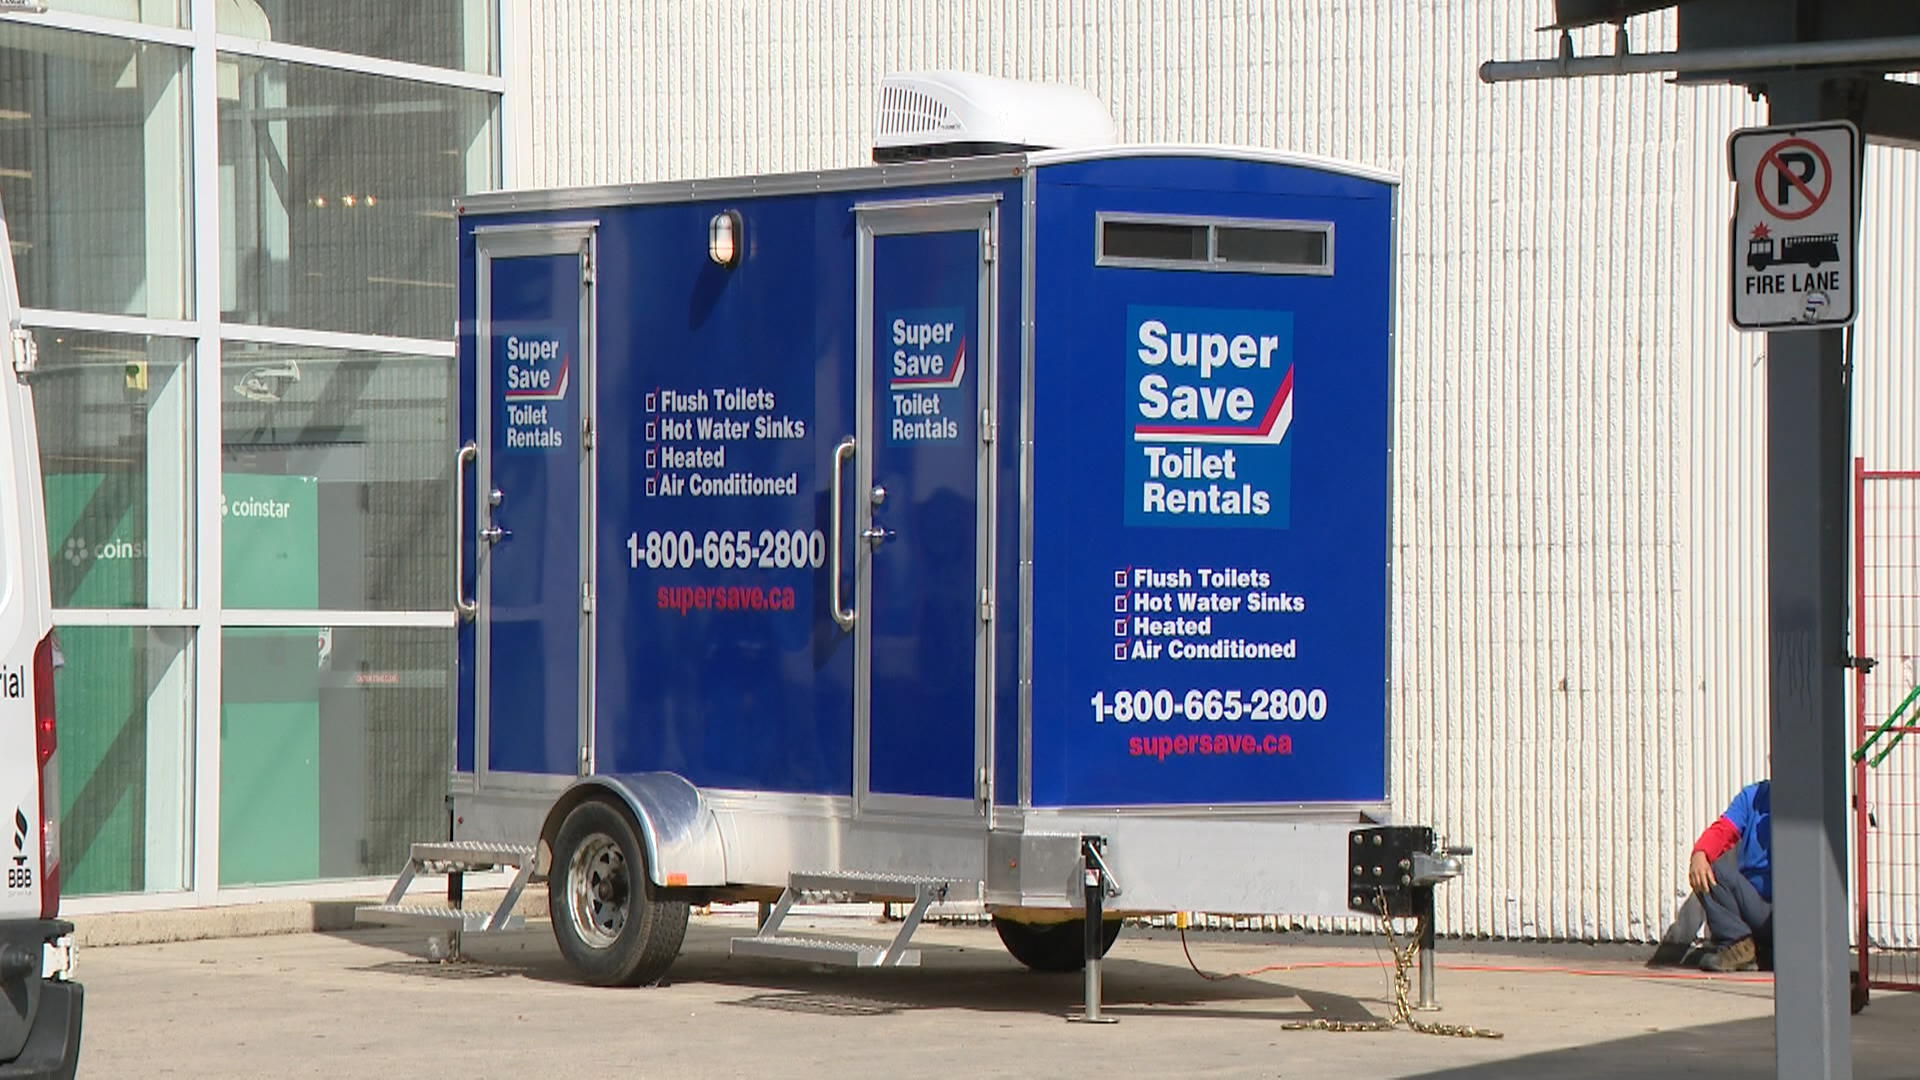 Could Superstore’s portable toilets help address Saskatoon’s lack of public washrooms?